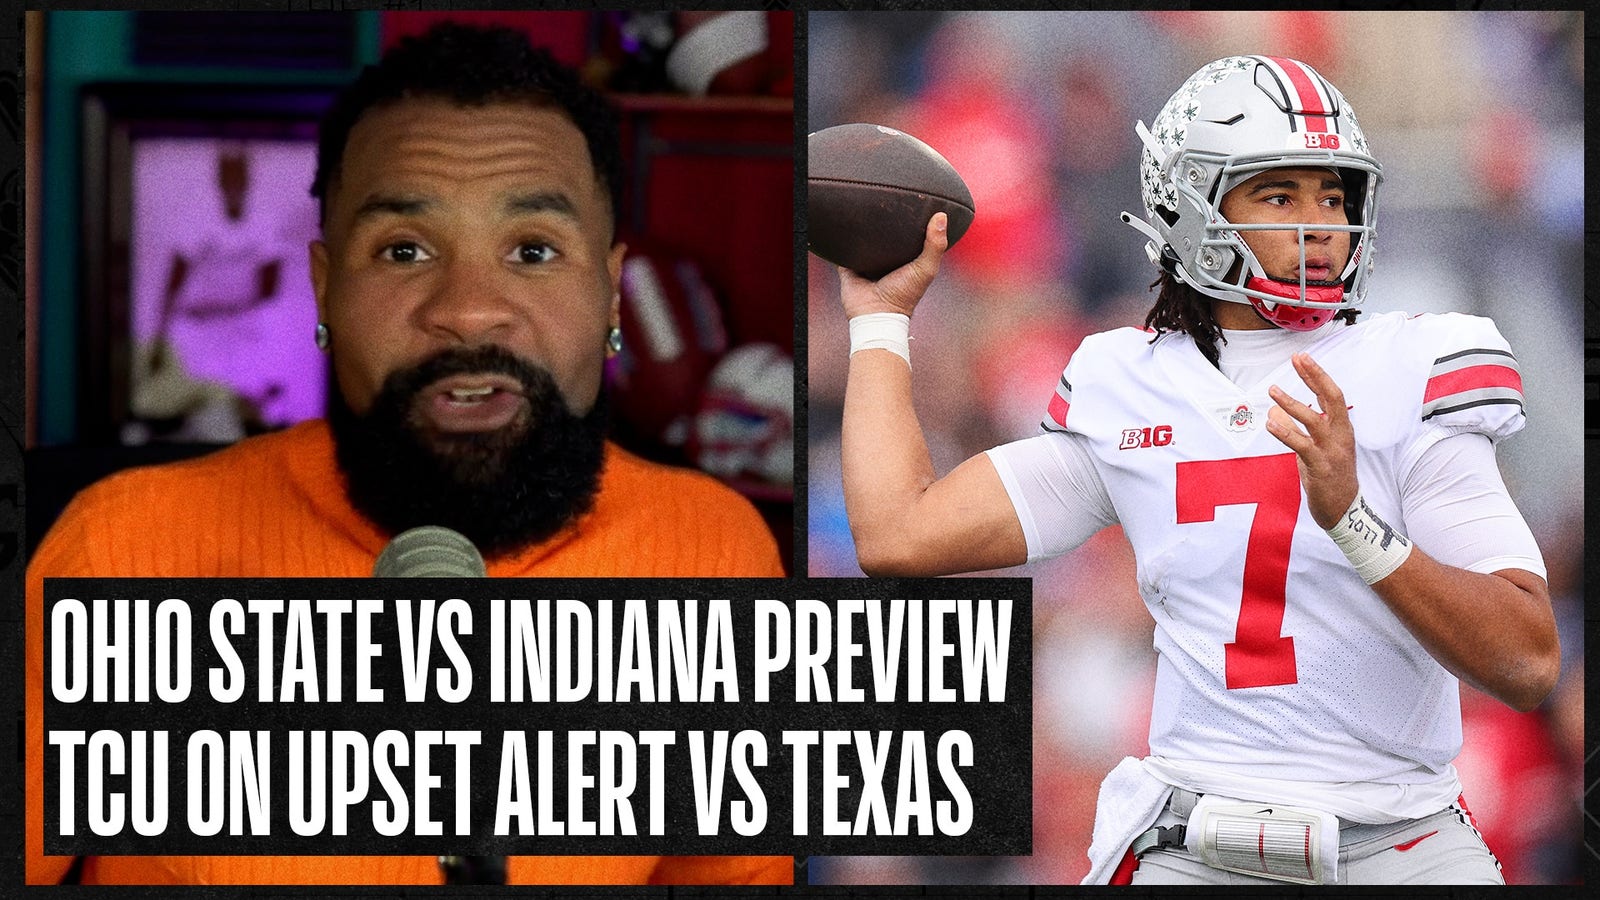 Previewing Ohio State vs. Indiana, more